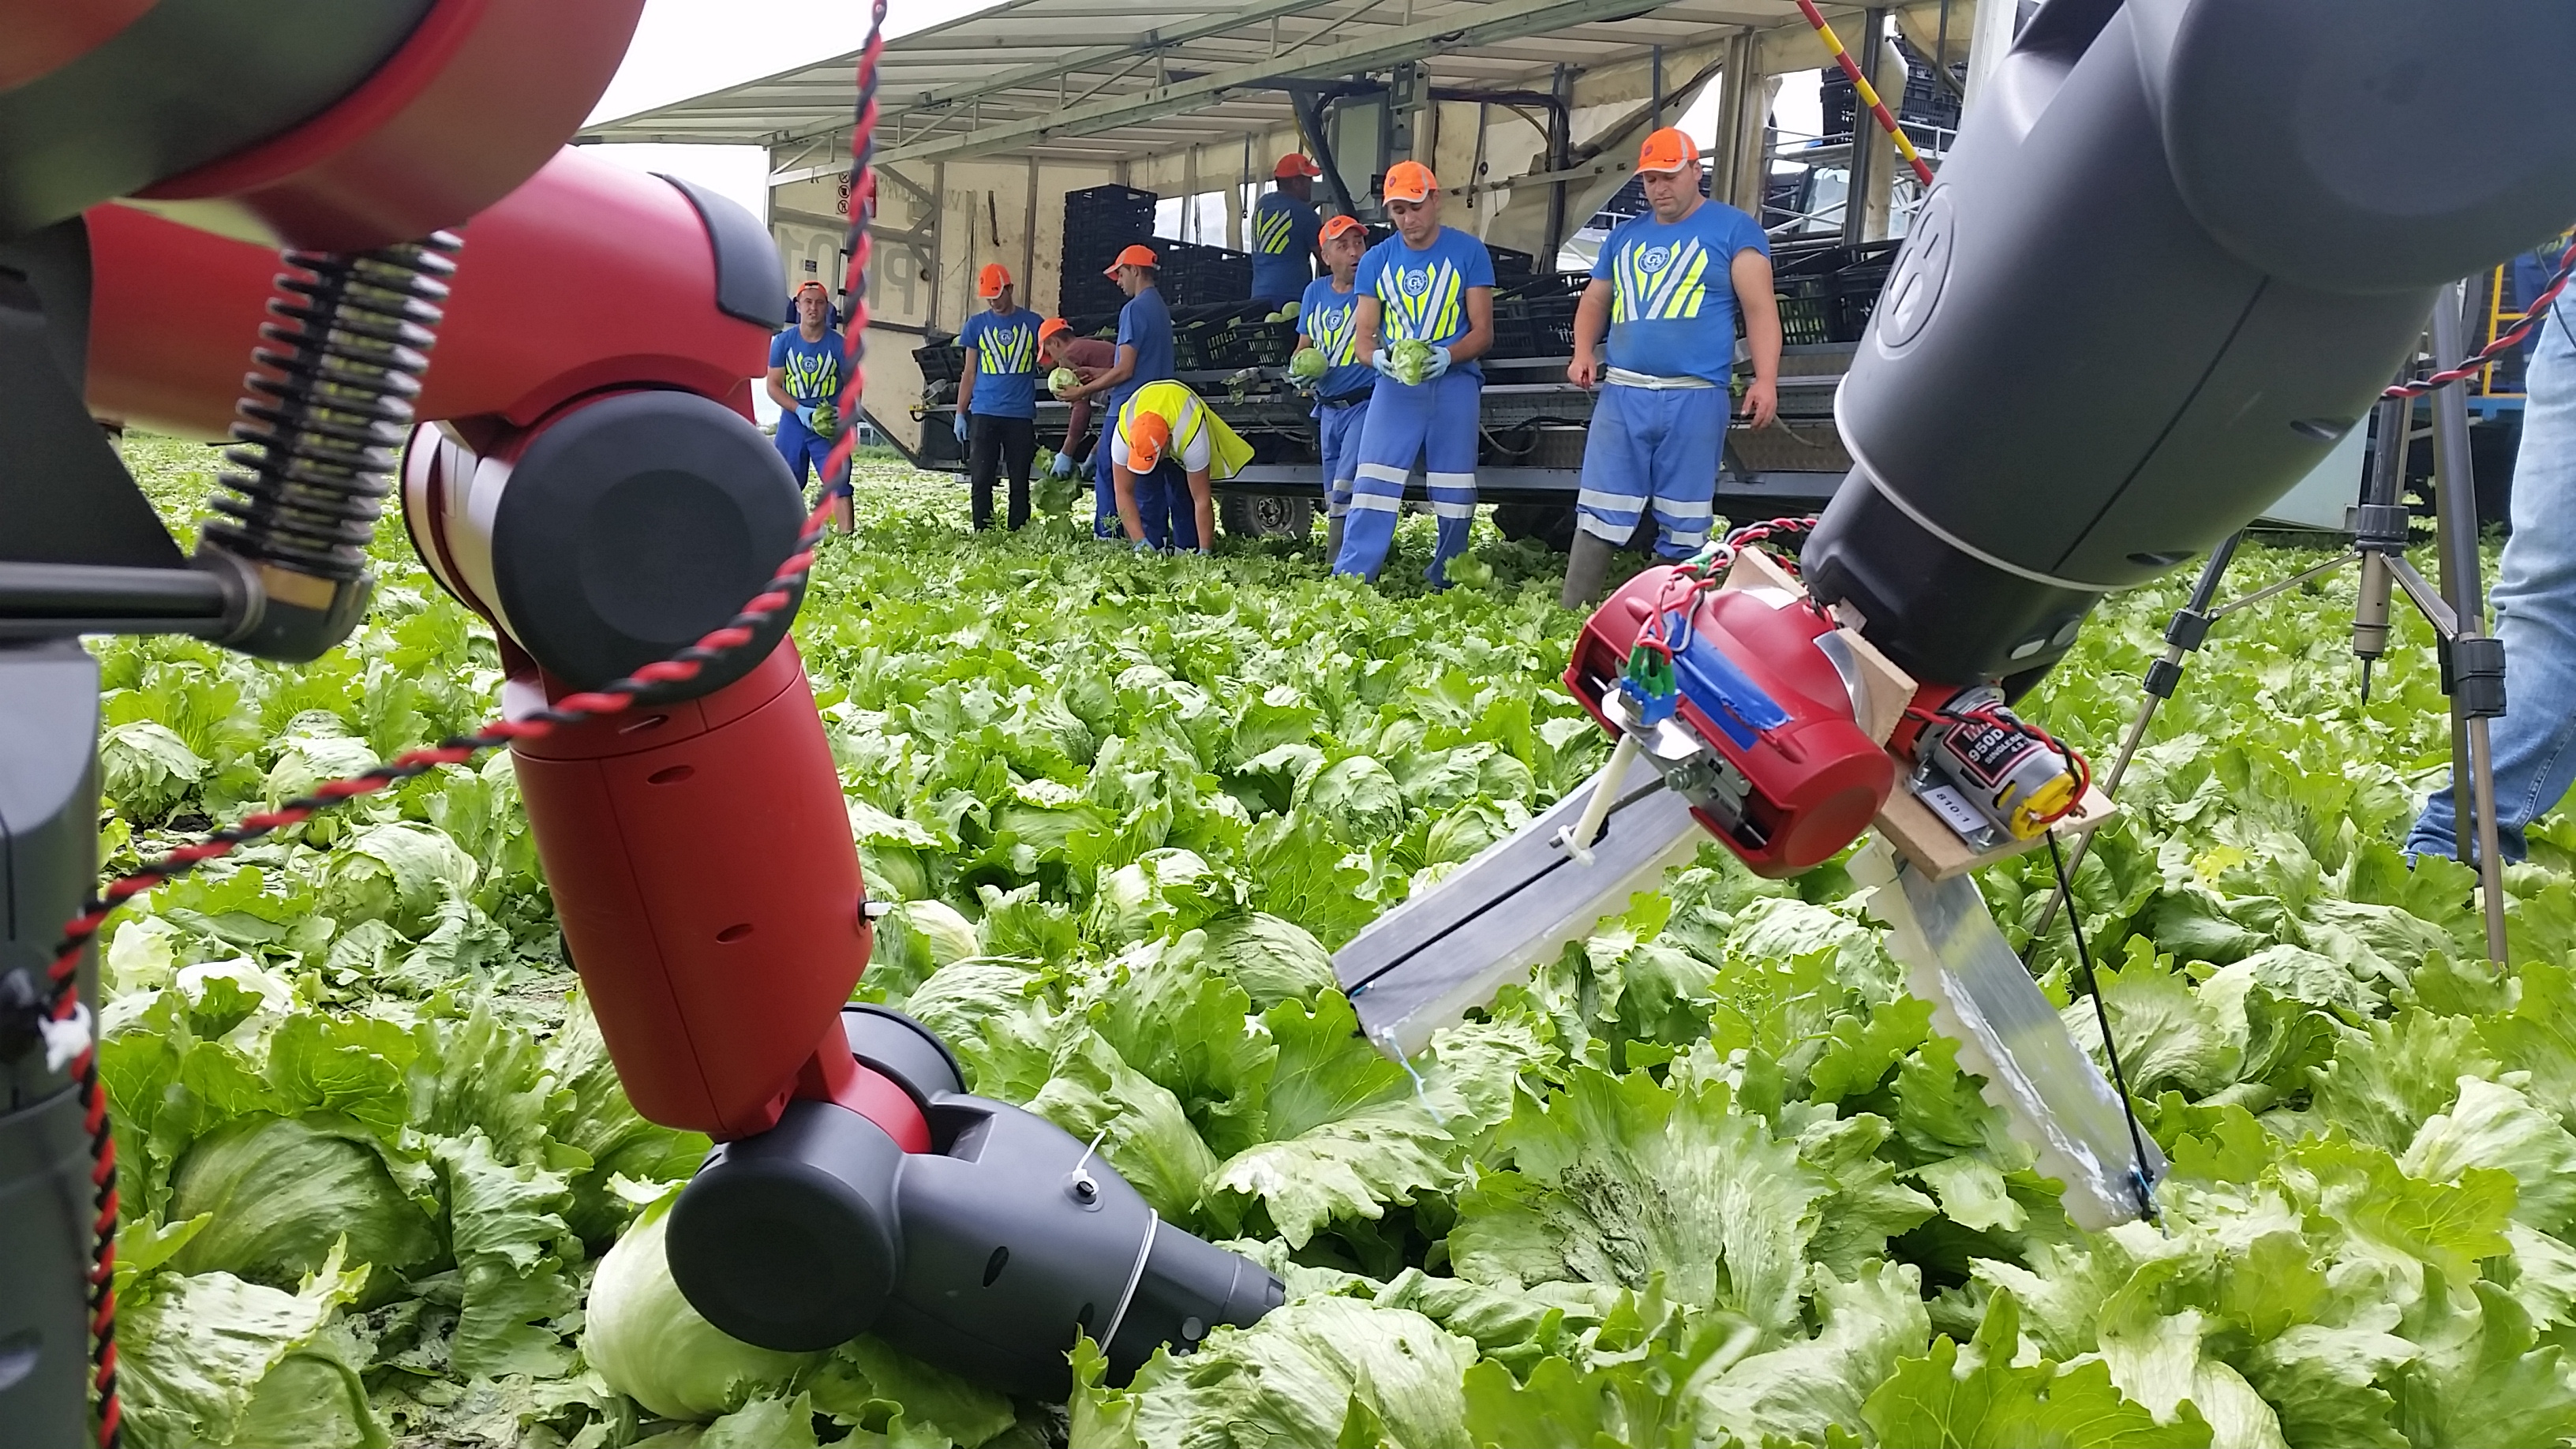 AGV robots robots in agriculture negative